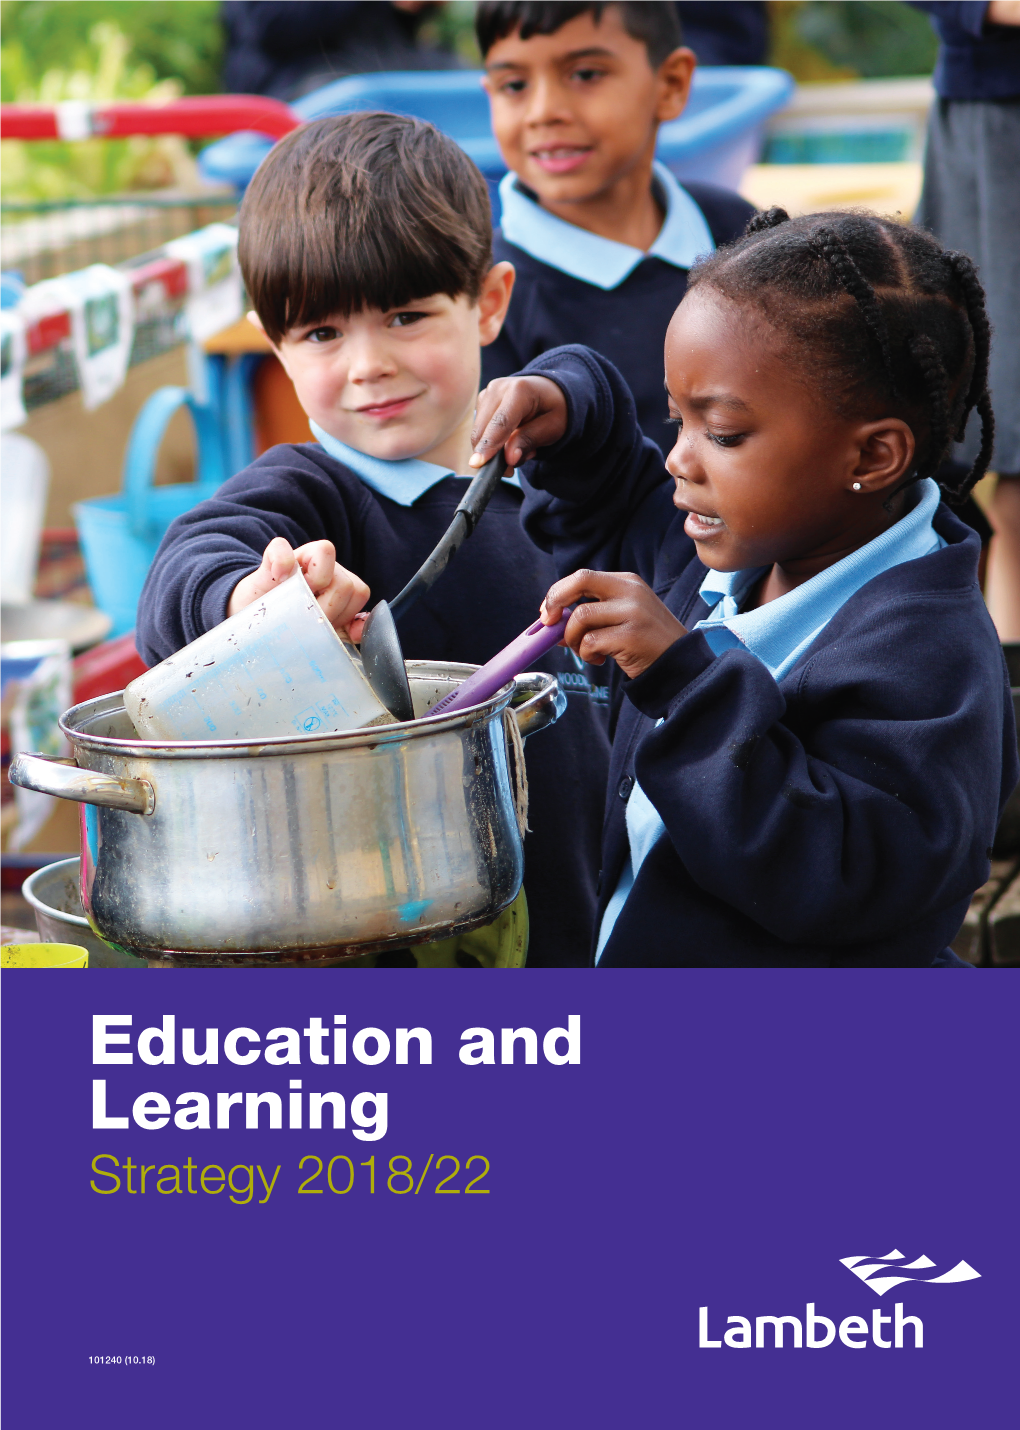 Education and Learning Strategy 2018/22